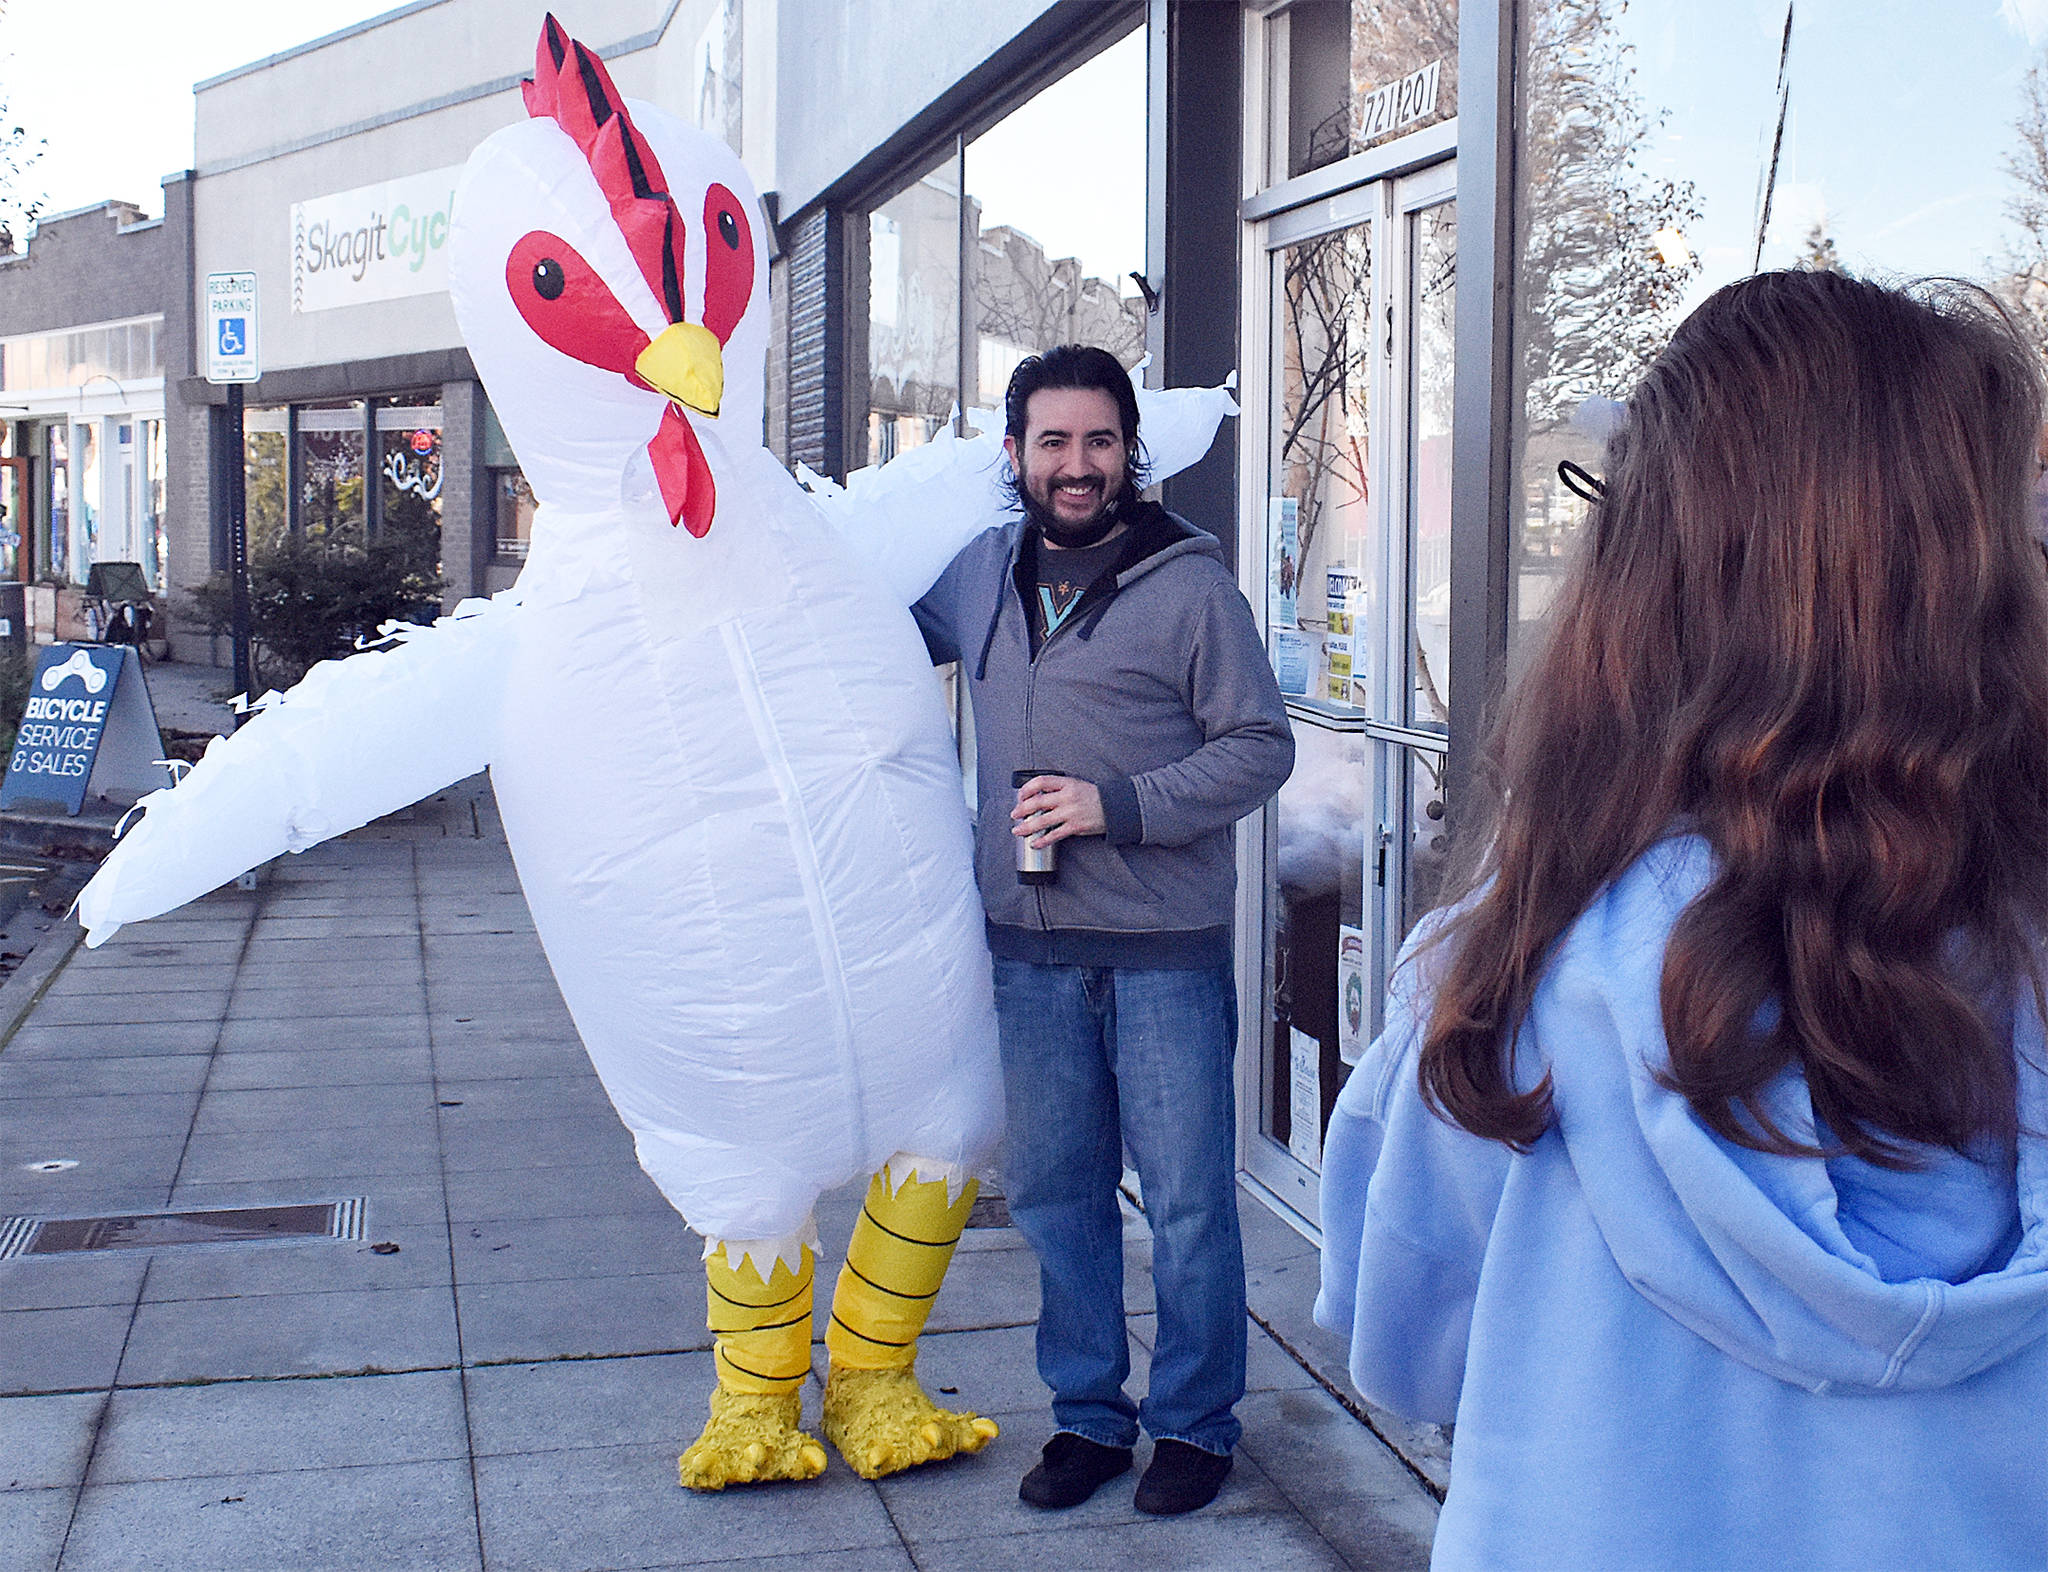 The Whidbey Island Chicken has become somewhat of a local celebrity in recent months, with many fans like Fernando Duran asking for a picture whenever they catch a glimpse. Photo by Emily Gilbert/Whidbey News-Times